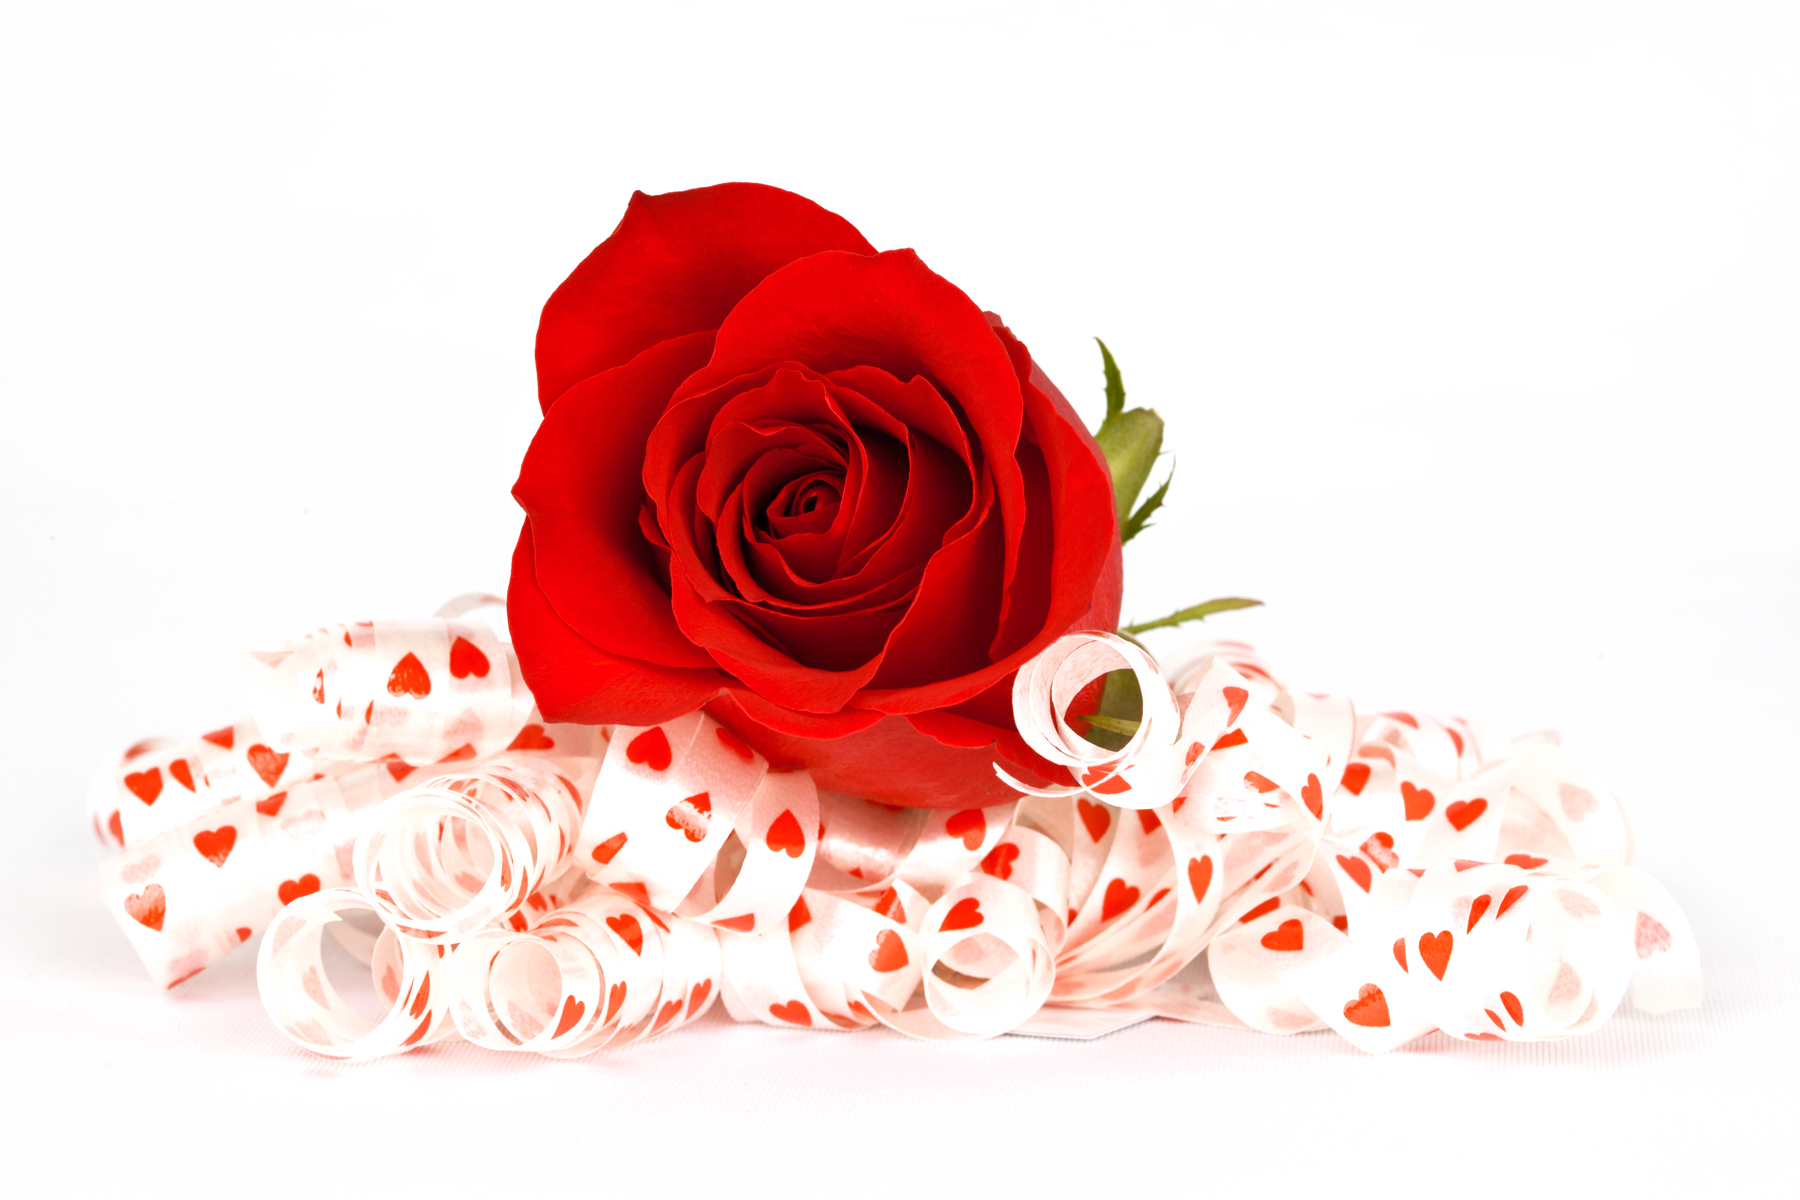 Red rose and ribbons photo